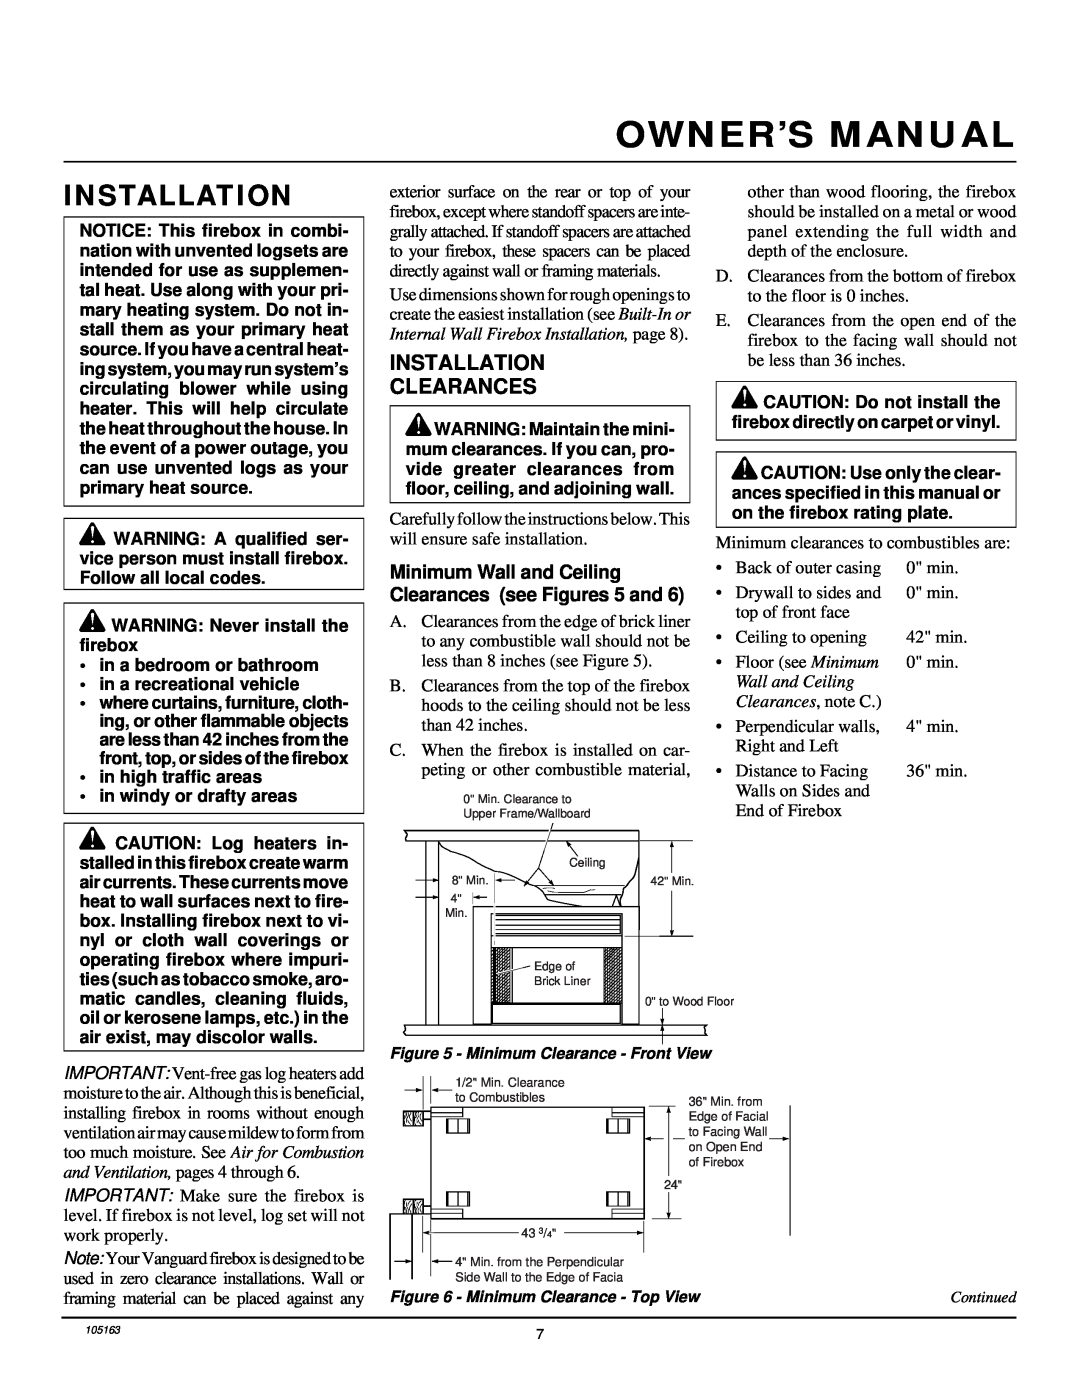 Desa FBPS installation manual Installation Clearances, Wall and Ceiling, Clearances, note C 